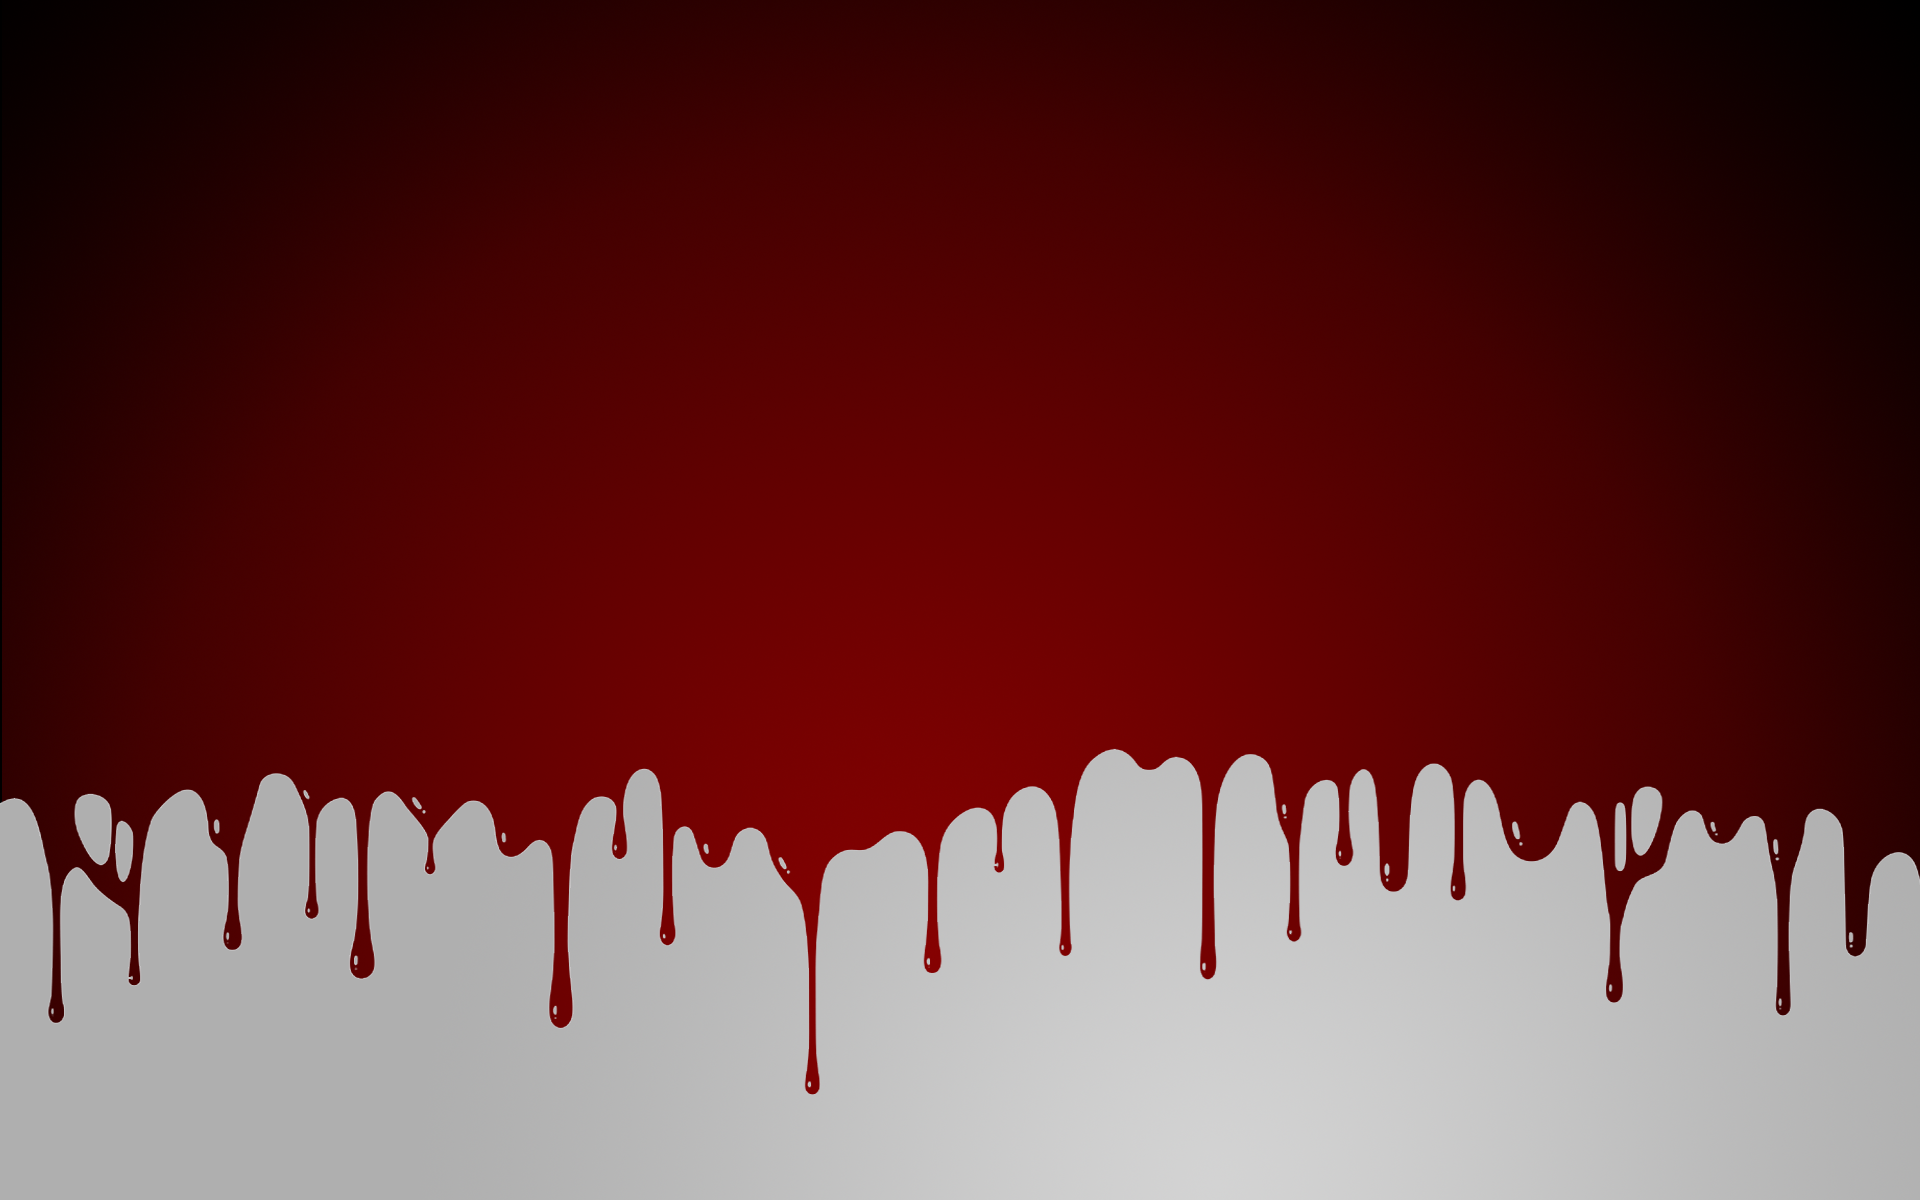 General 1920x1200 digital art solid color red white minimalism